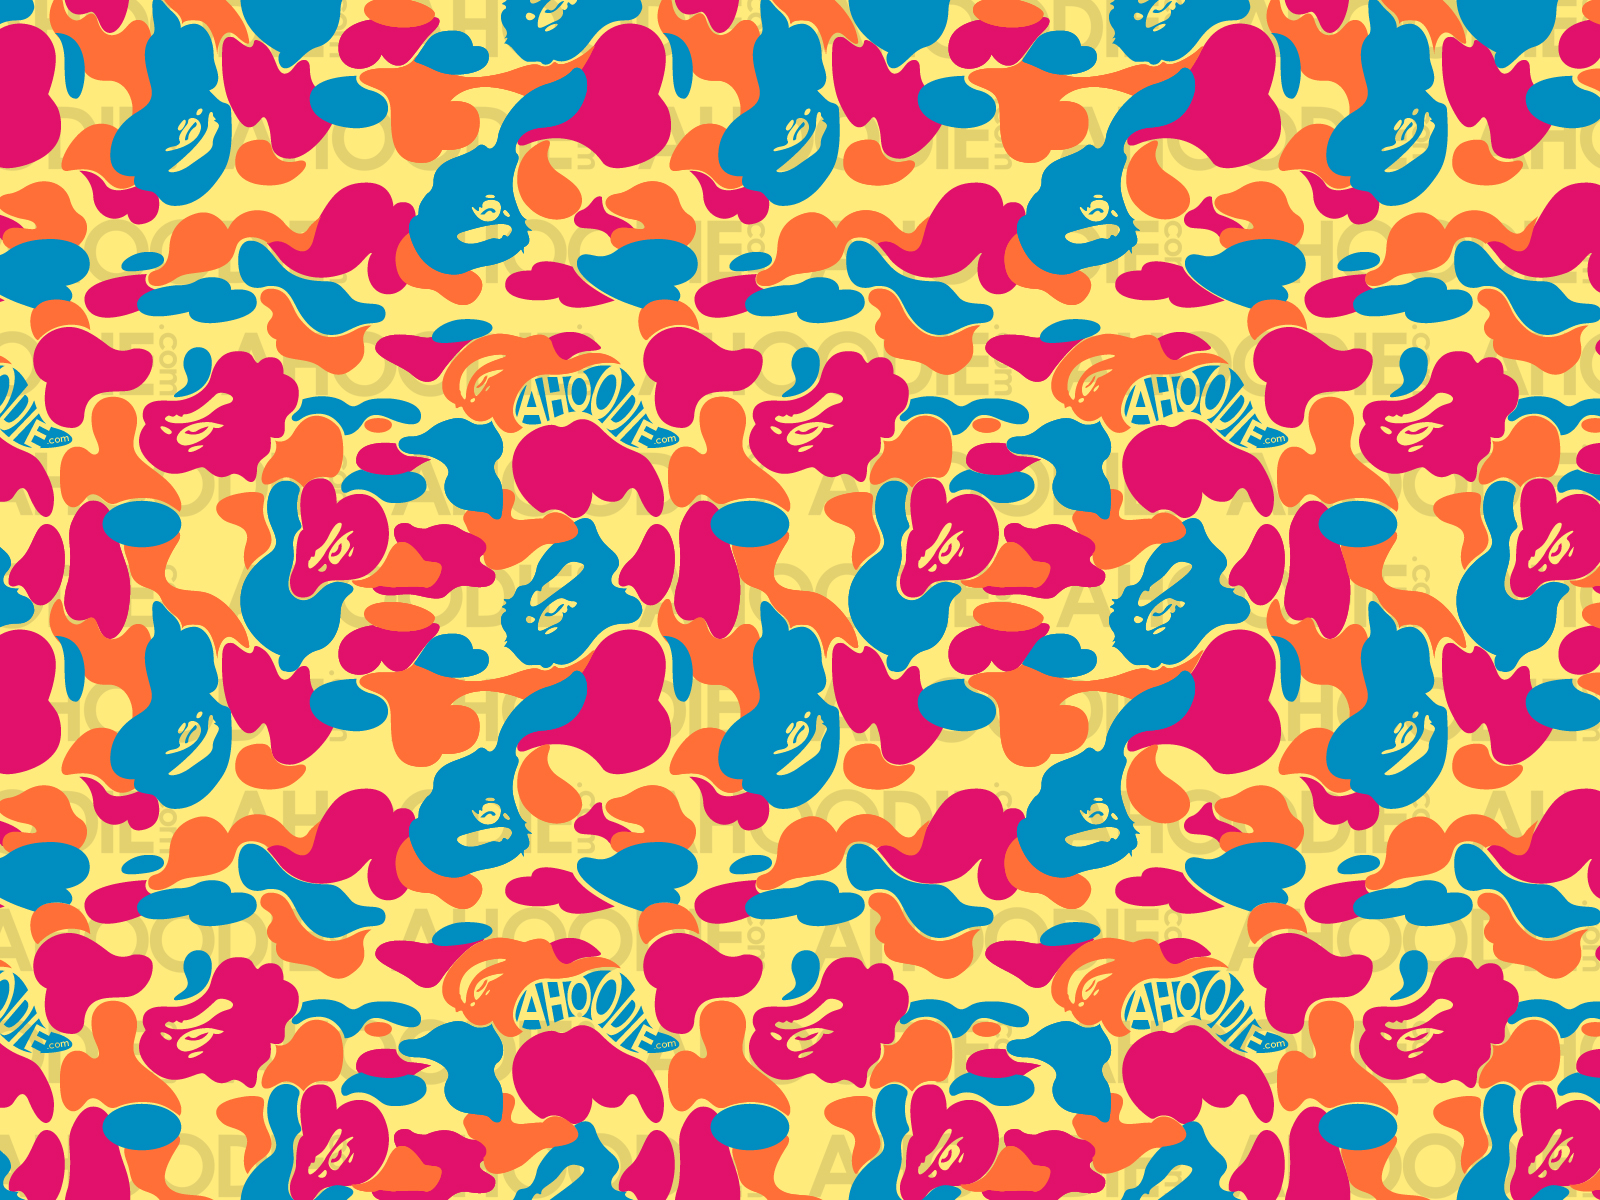 Bape camouflage wallpapers. Due to popular demand, AHOODIE released new bape 